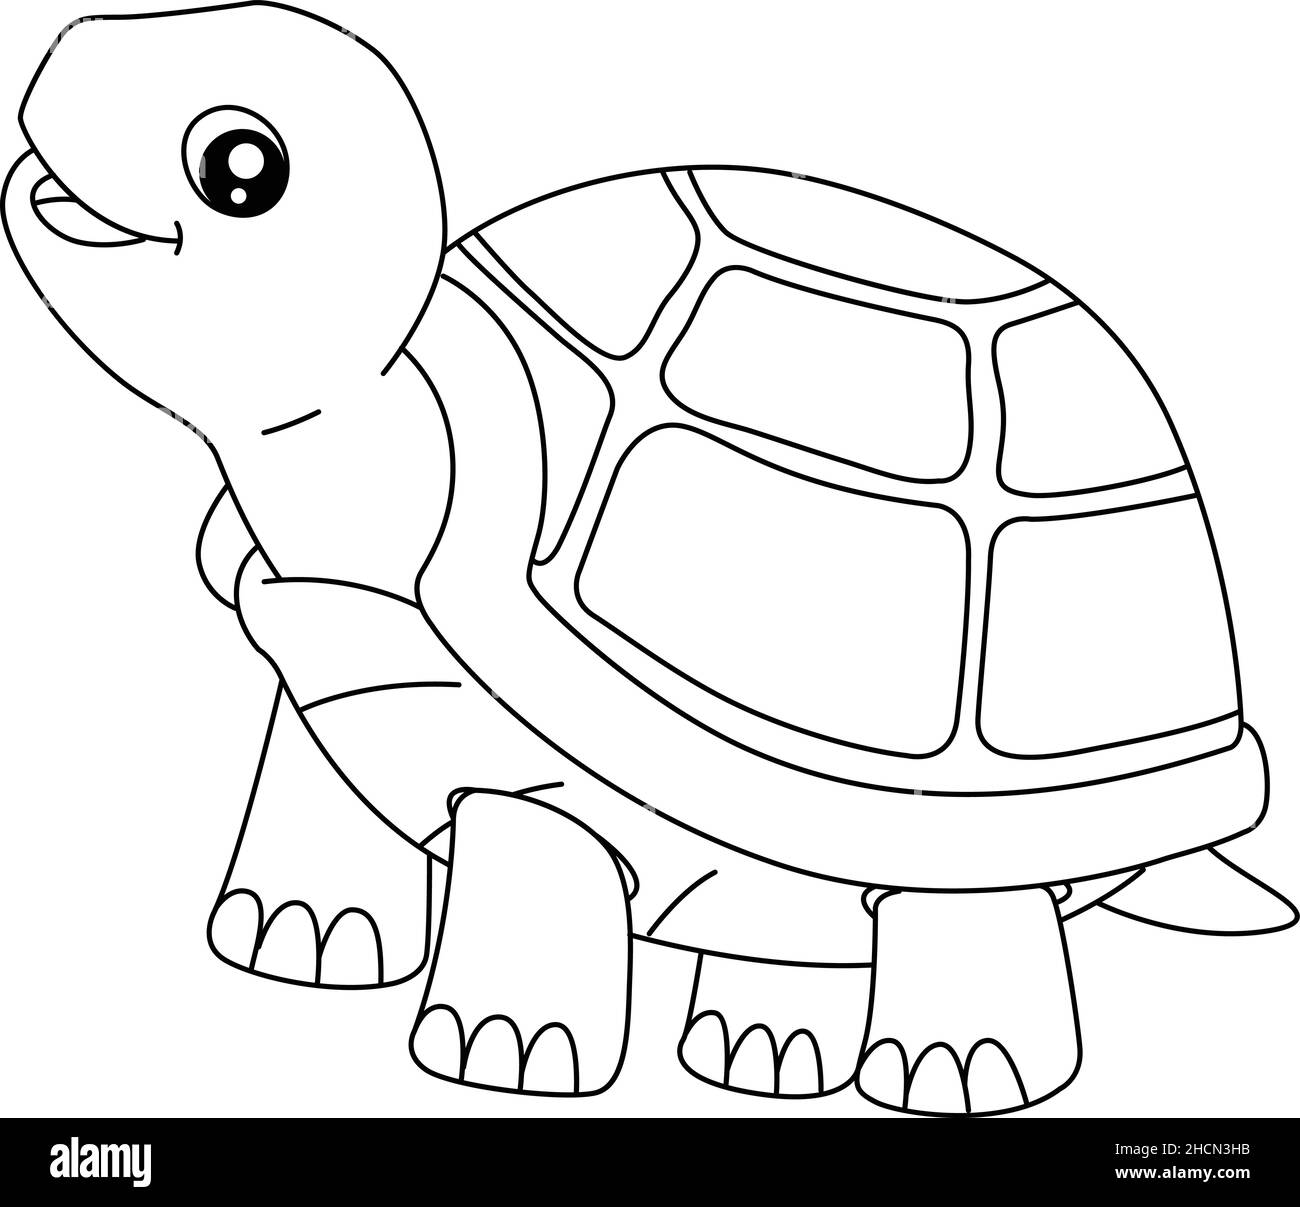 Turtle Coloring Page for Isolated Kids Stock Vector